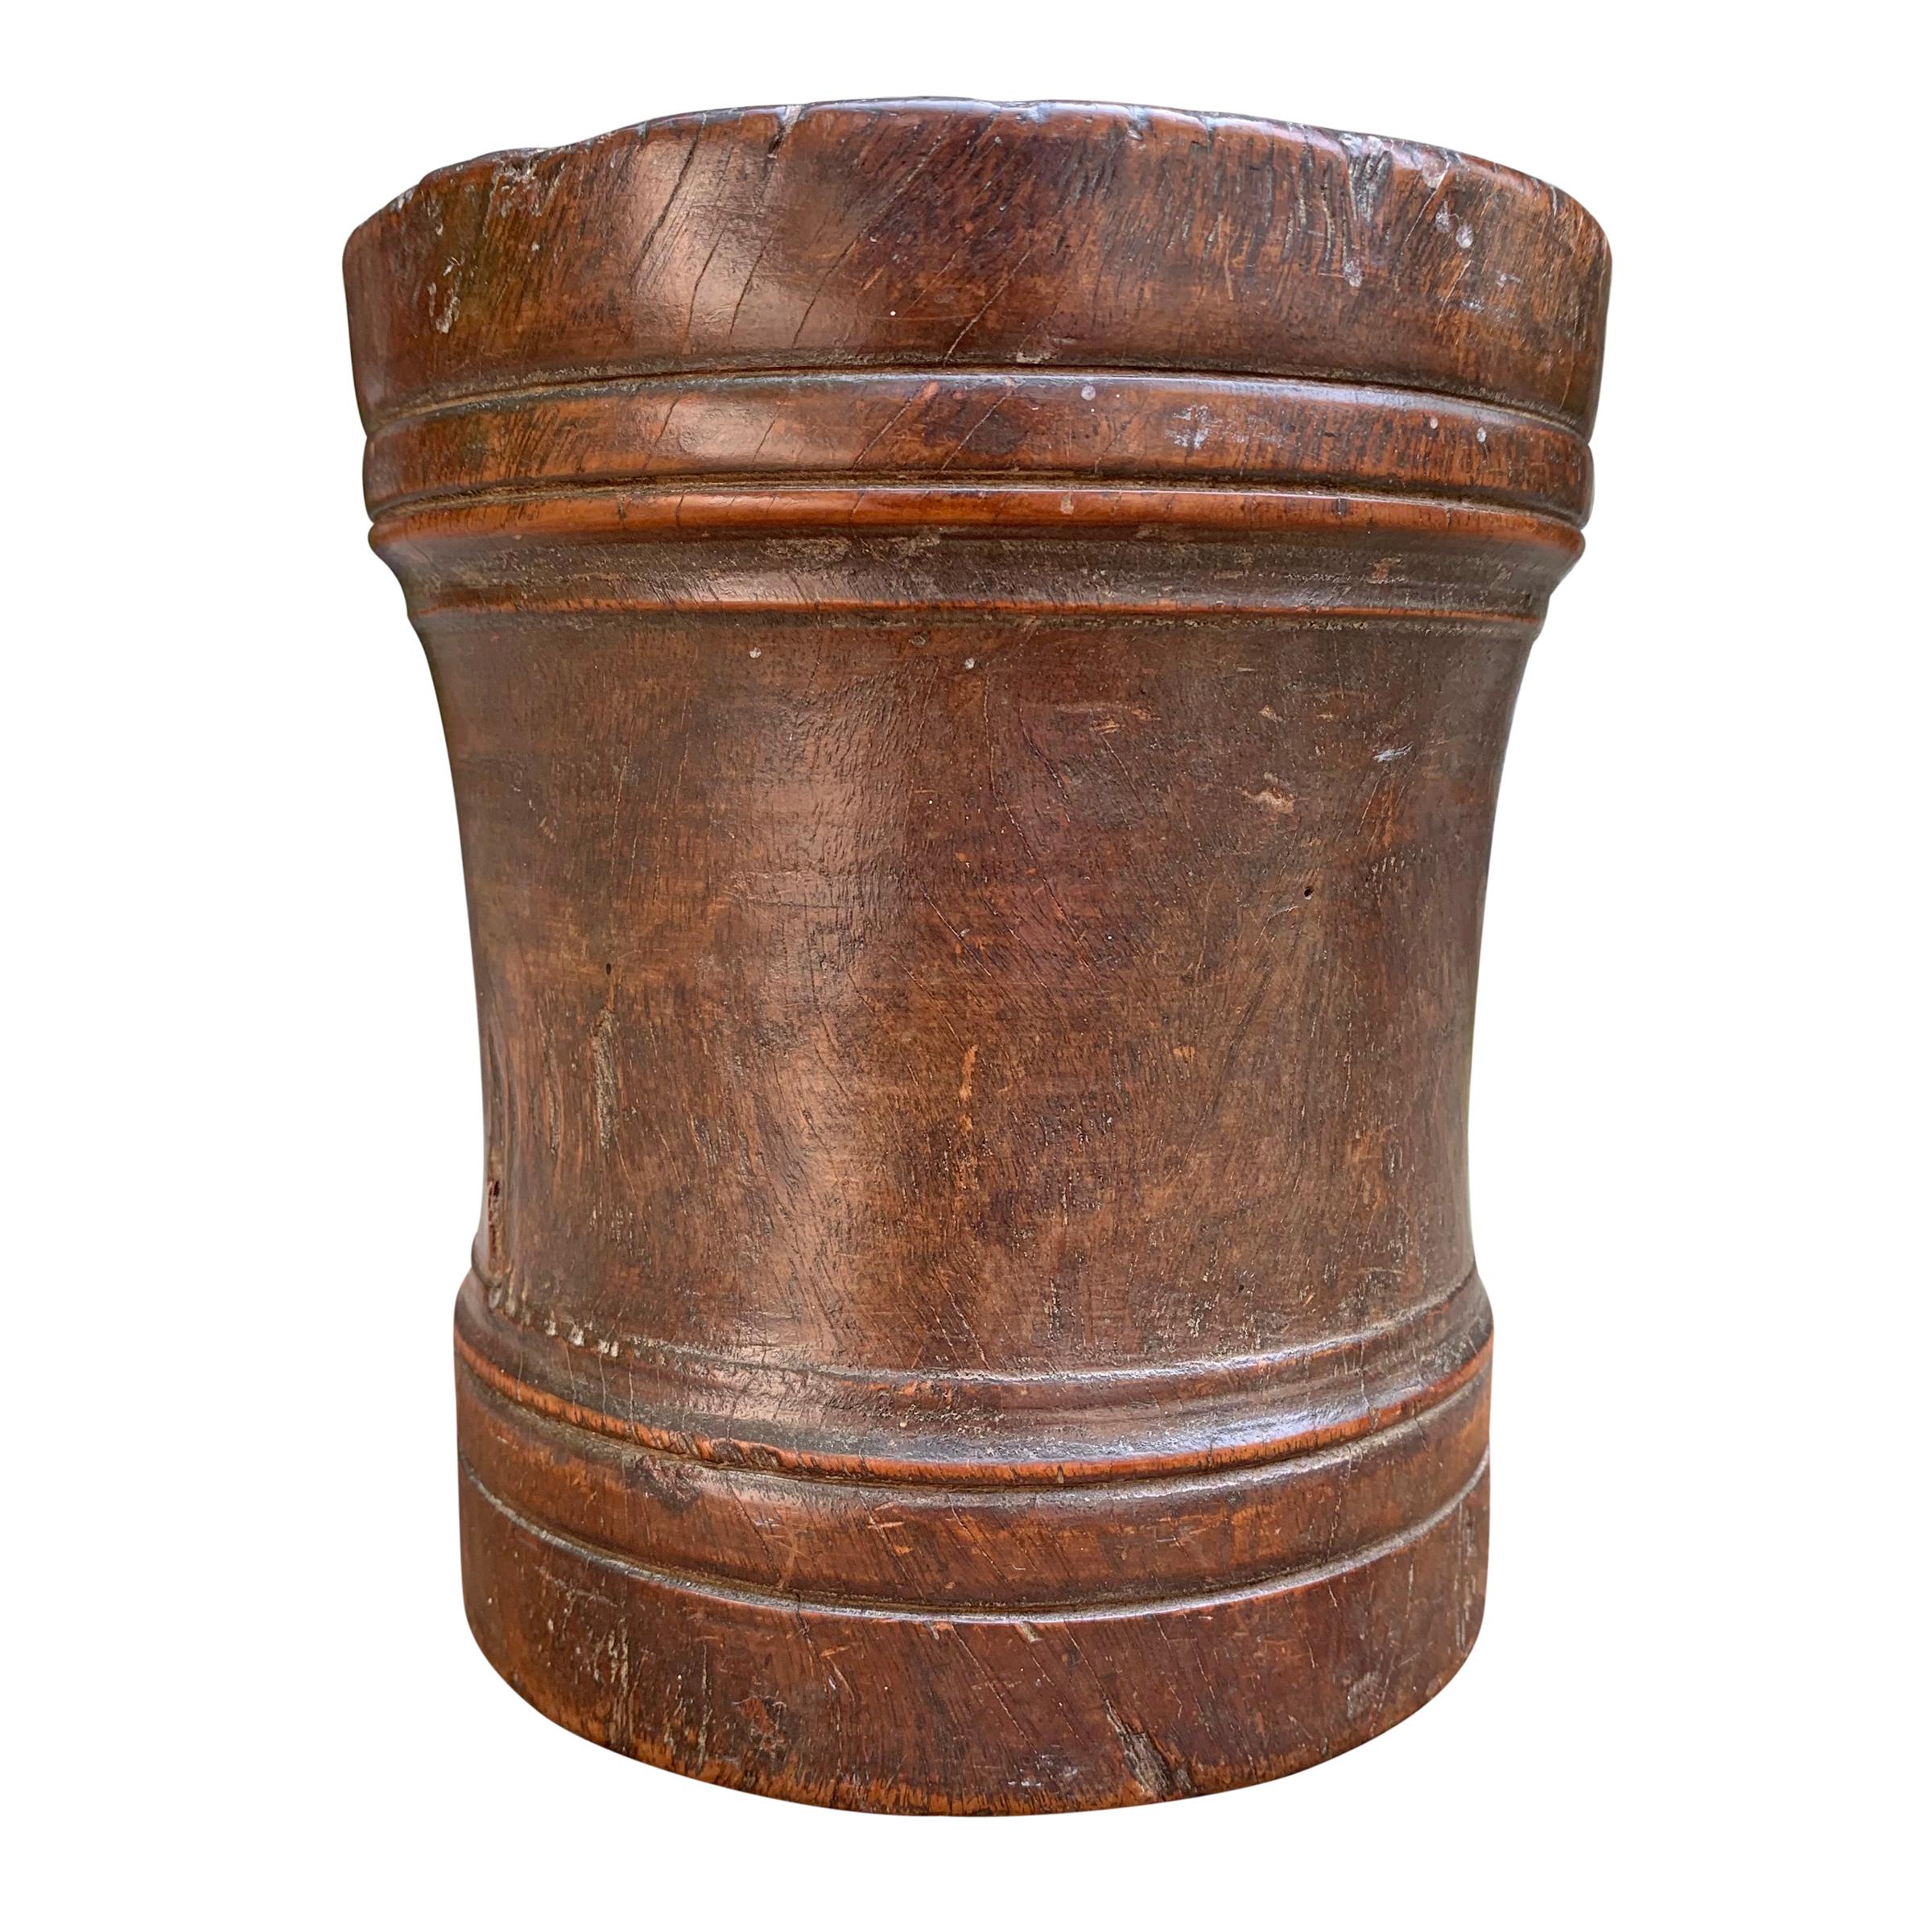 An incredible 17th century English mortar and pestle made from turned lignum vitae, an extremely dense hardwood found in parts of the Caribbean and South America, with incised and raised bands and a patina only four hundred years could bestow.